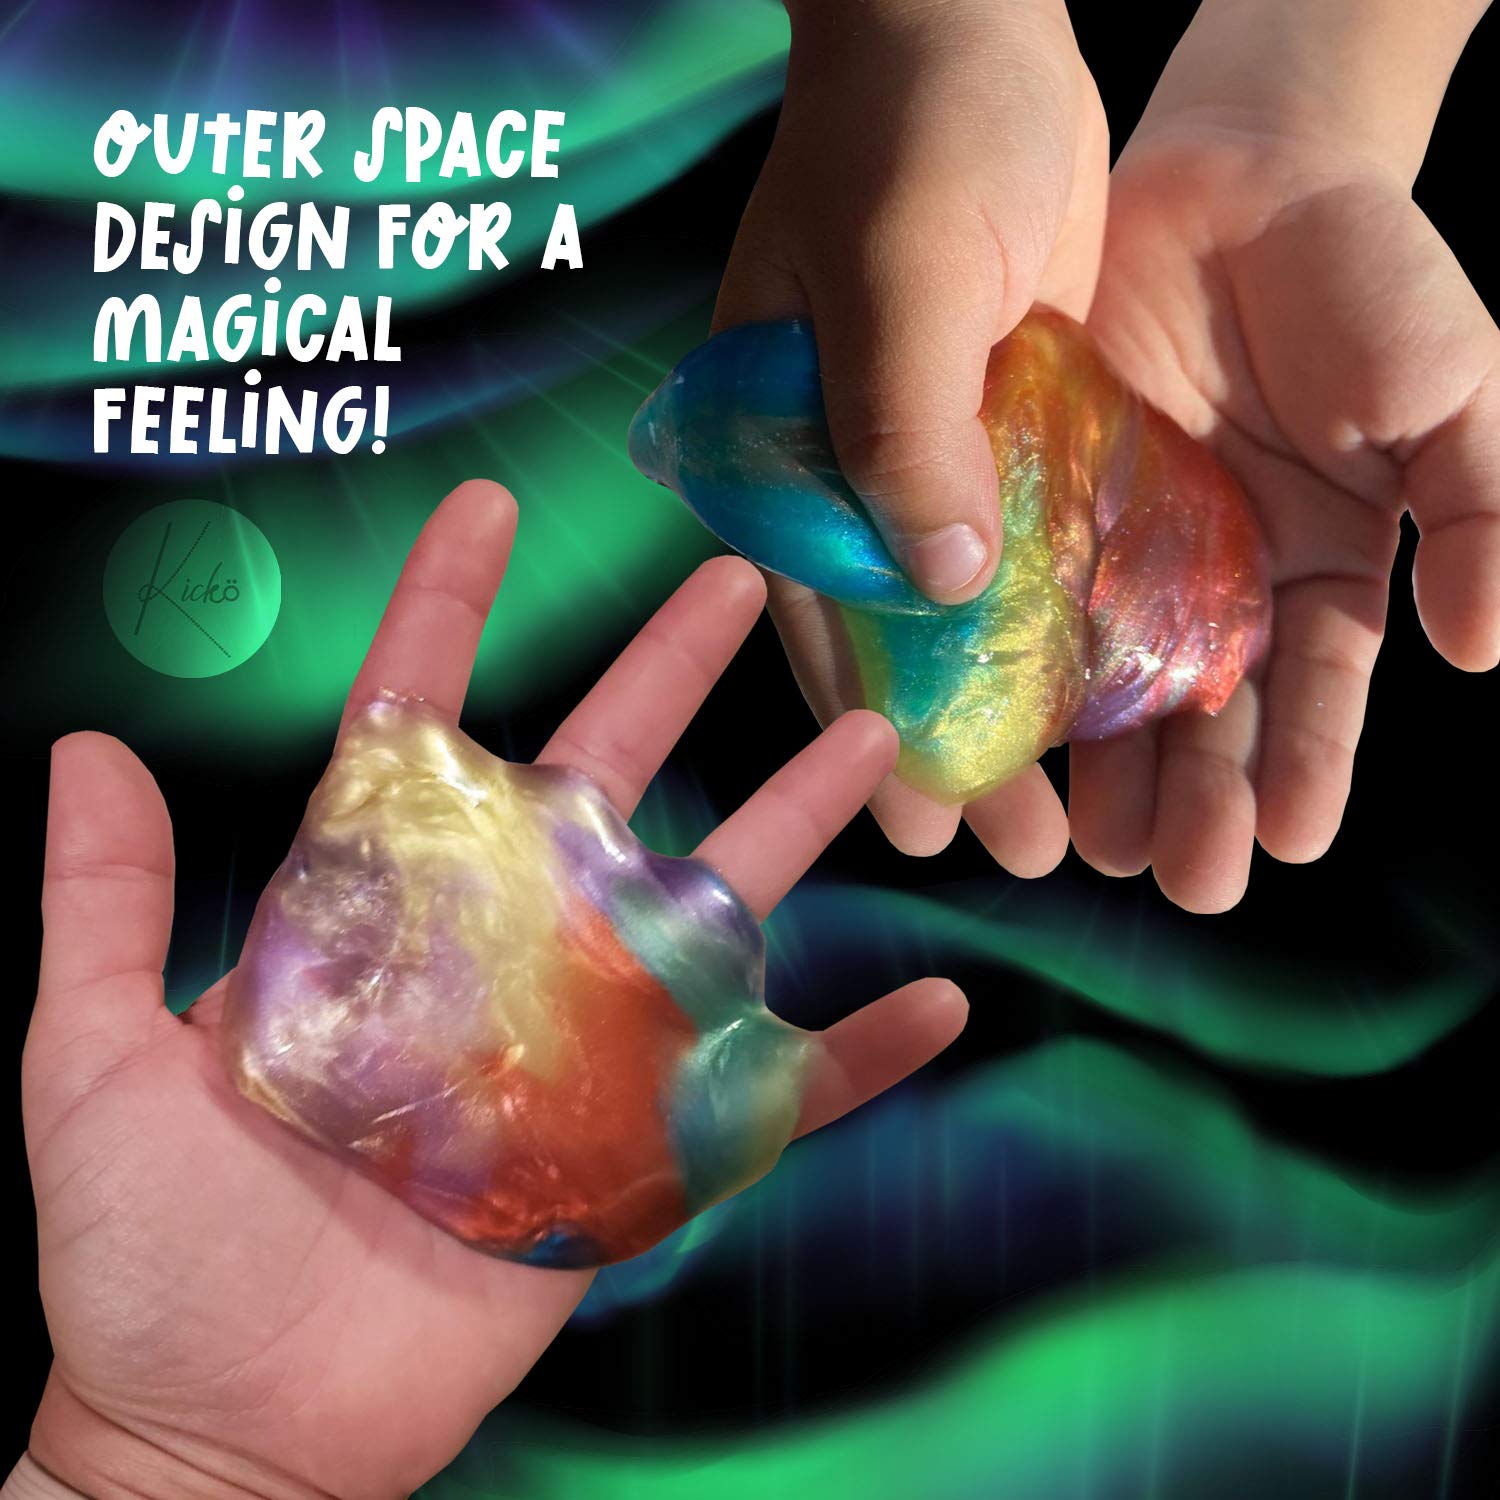 Kicko Marbled Unicorn Color Slime - Pack of 6 Colorful Galaxy Sludgy Gooey Kit for Sensory and Tactile Stimulation, Stress Relief, Prize, Party Favor, Educational Game - Kids, Boys, Girls